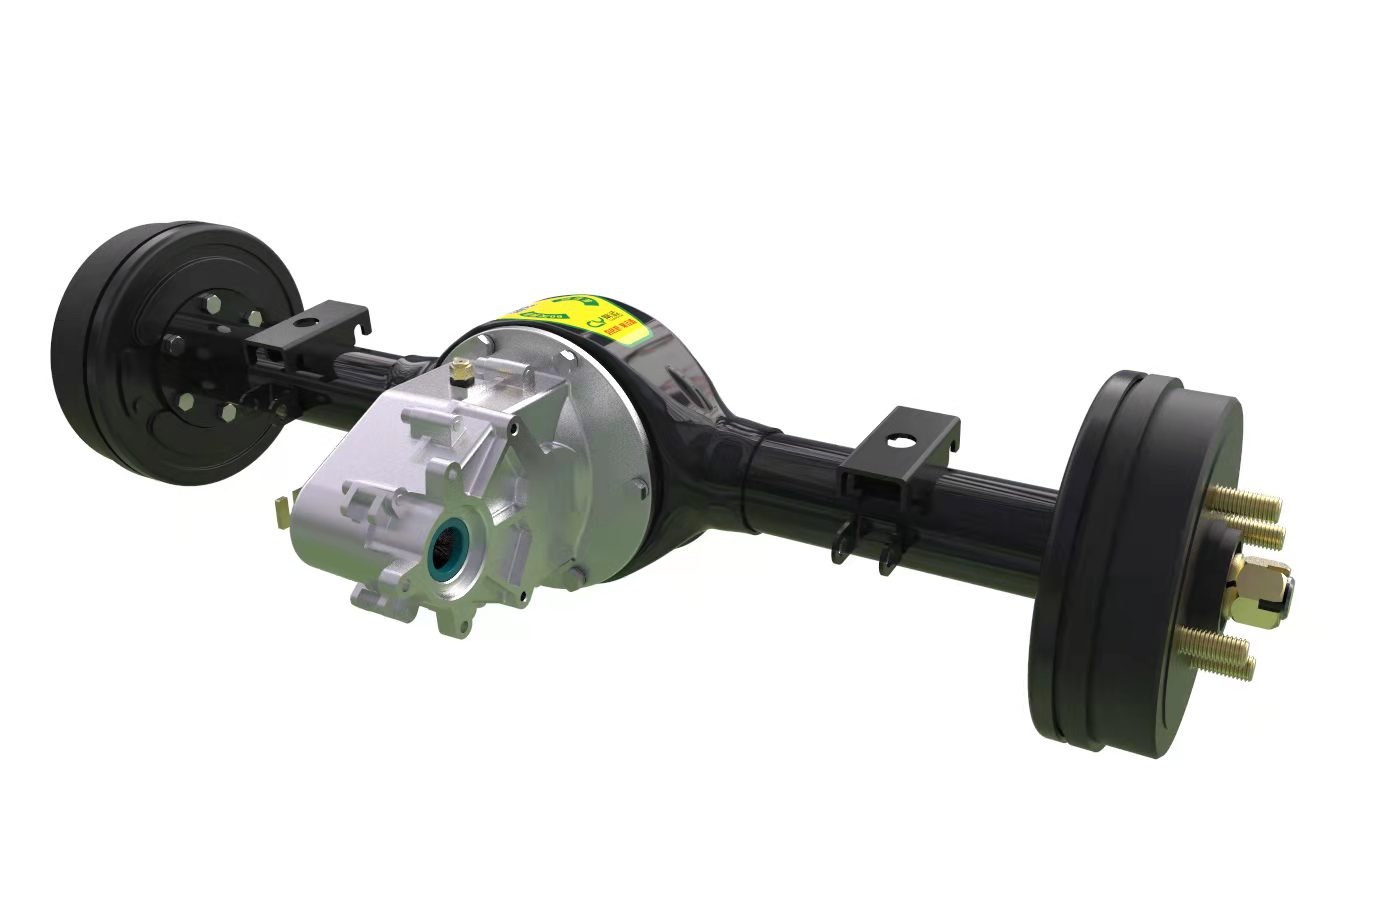 XDRA-AB7 One-piece rear axle for freight, freight tricycle rear axle, tricycle rear axle